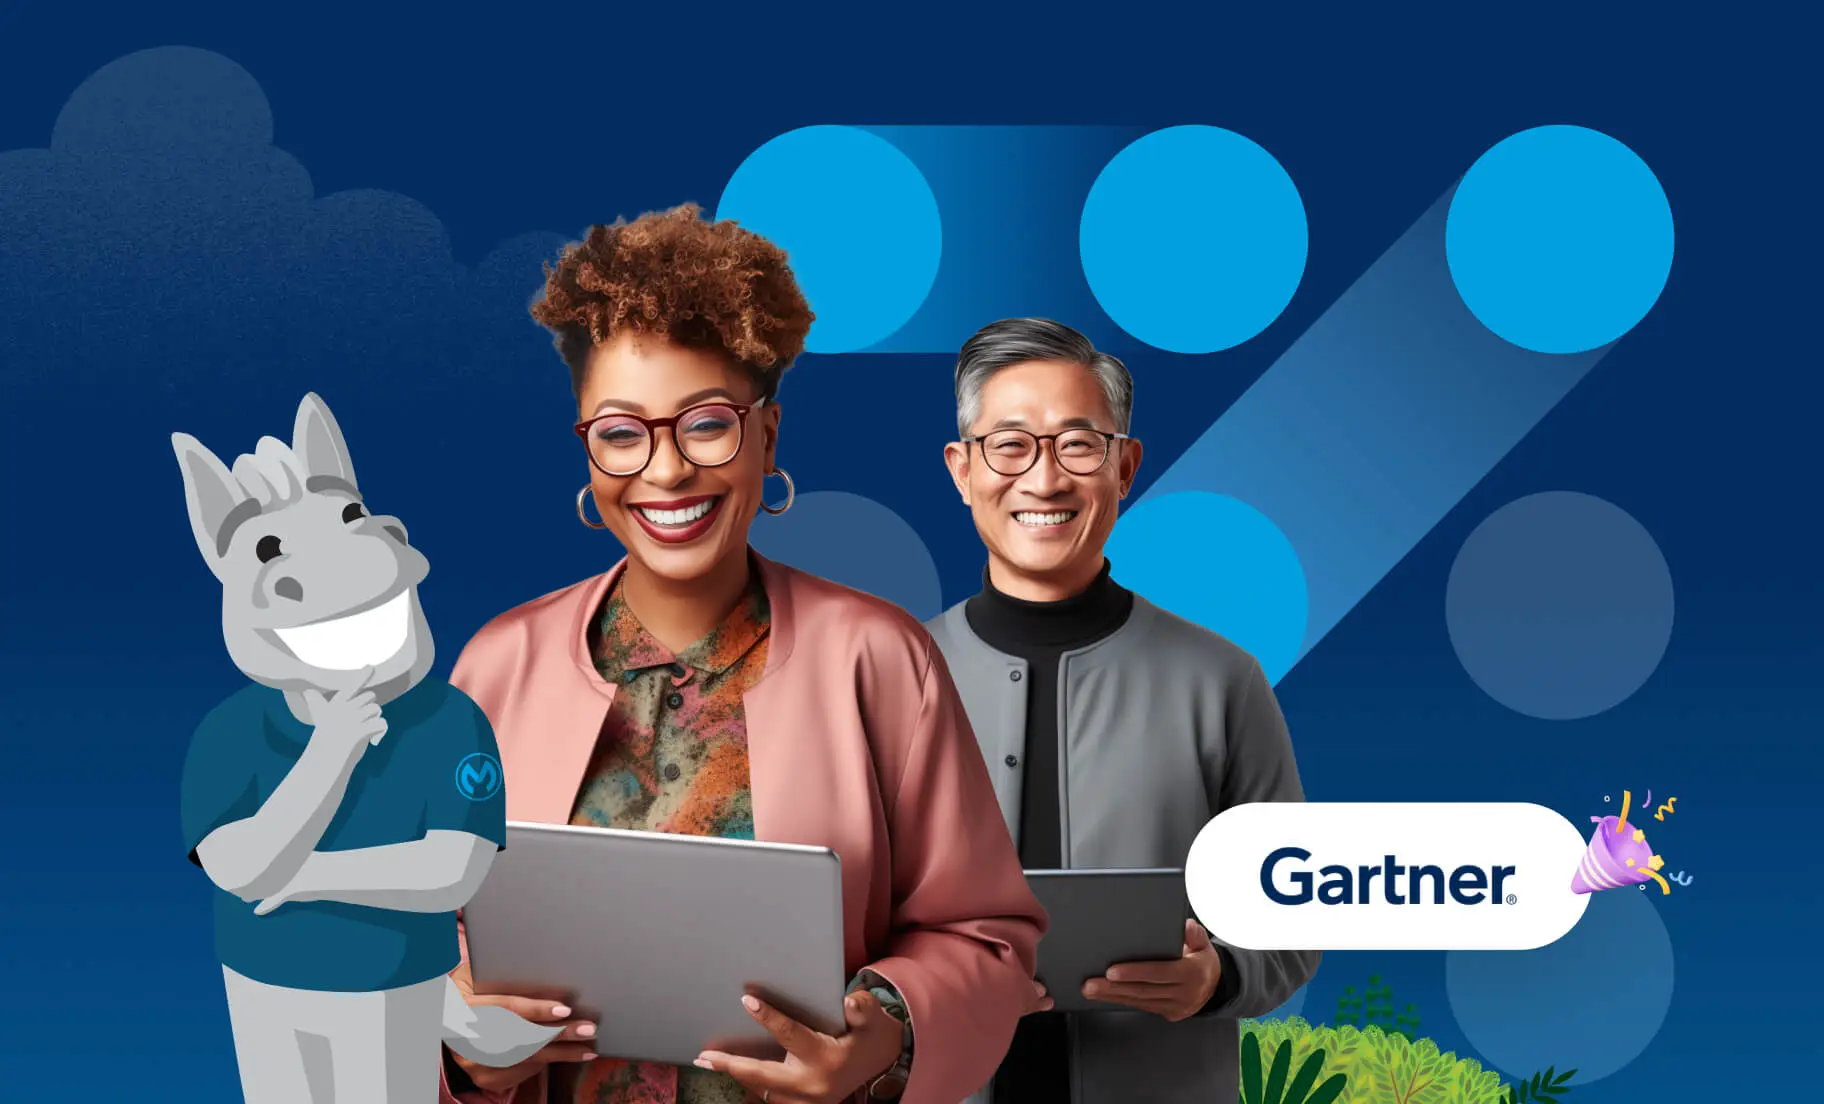 Download complimentary copies of the Gartner Magic Quadrant reports to learn why MuleSoft was named a Leader.